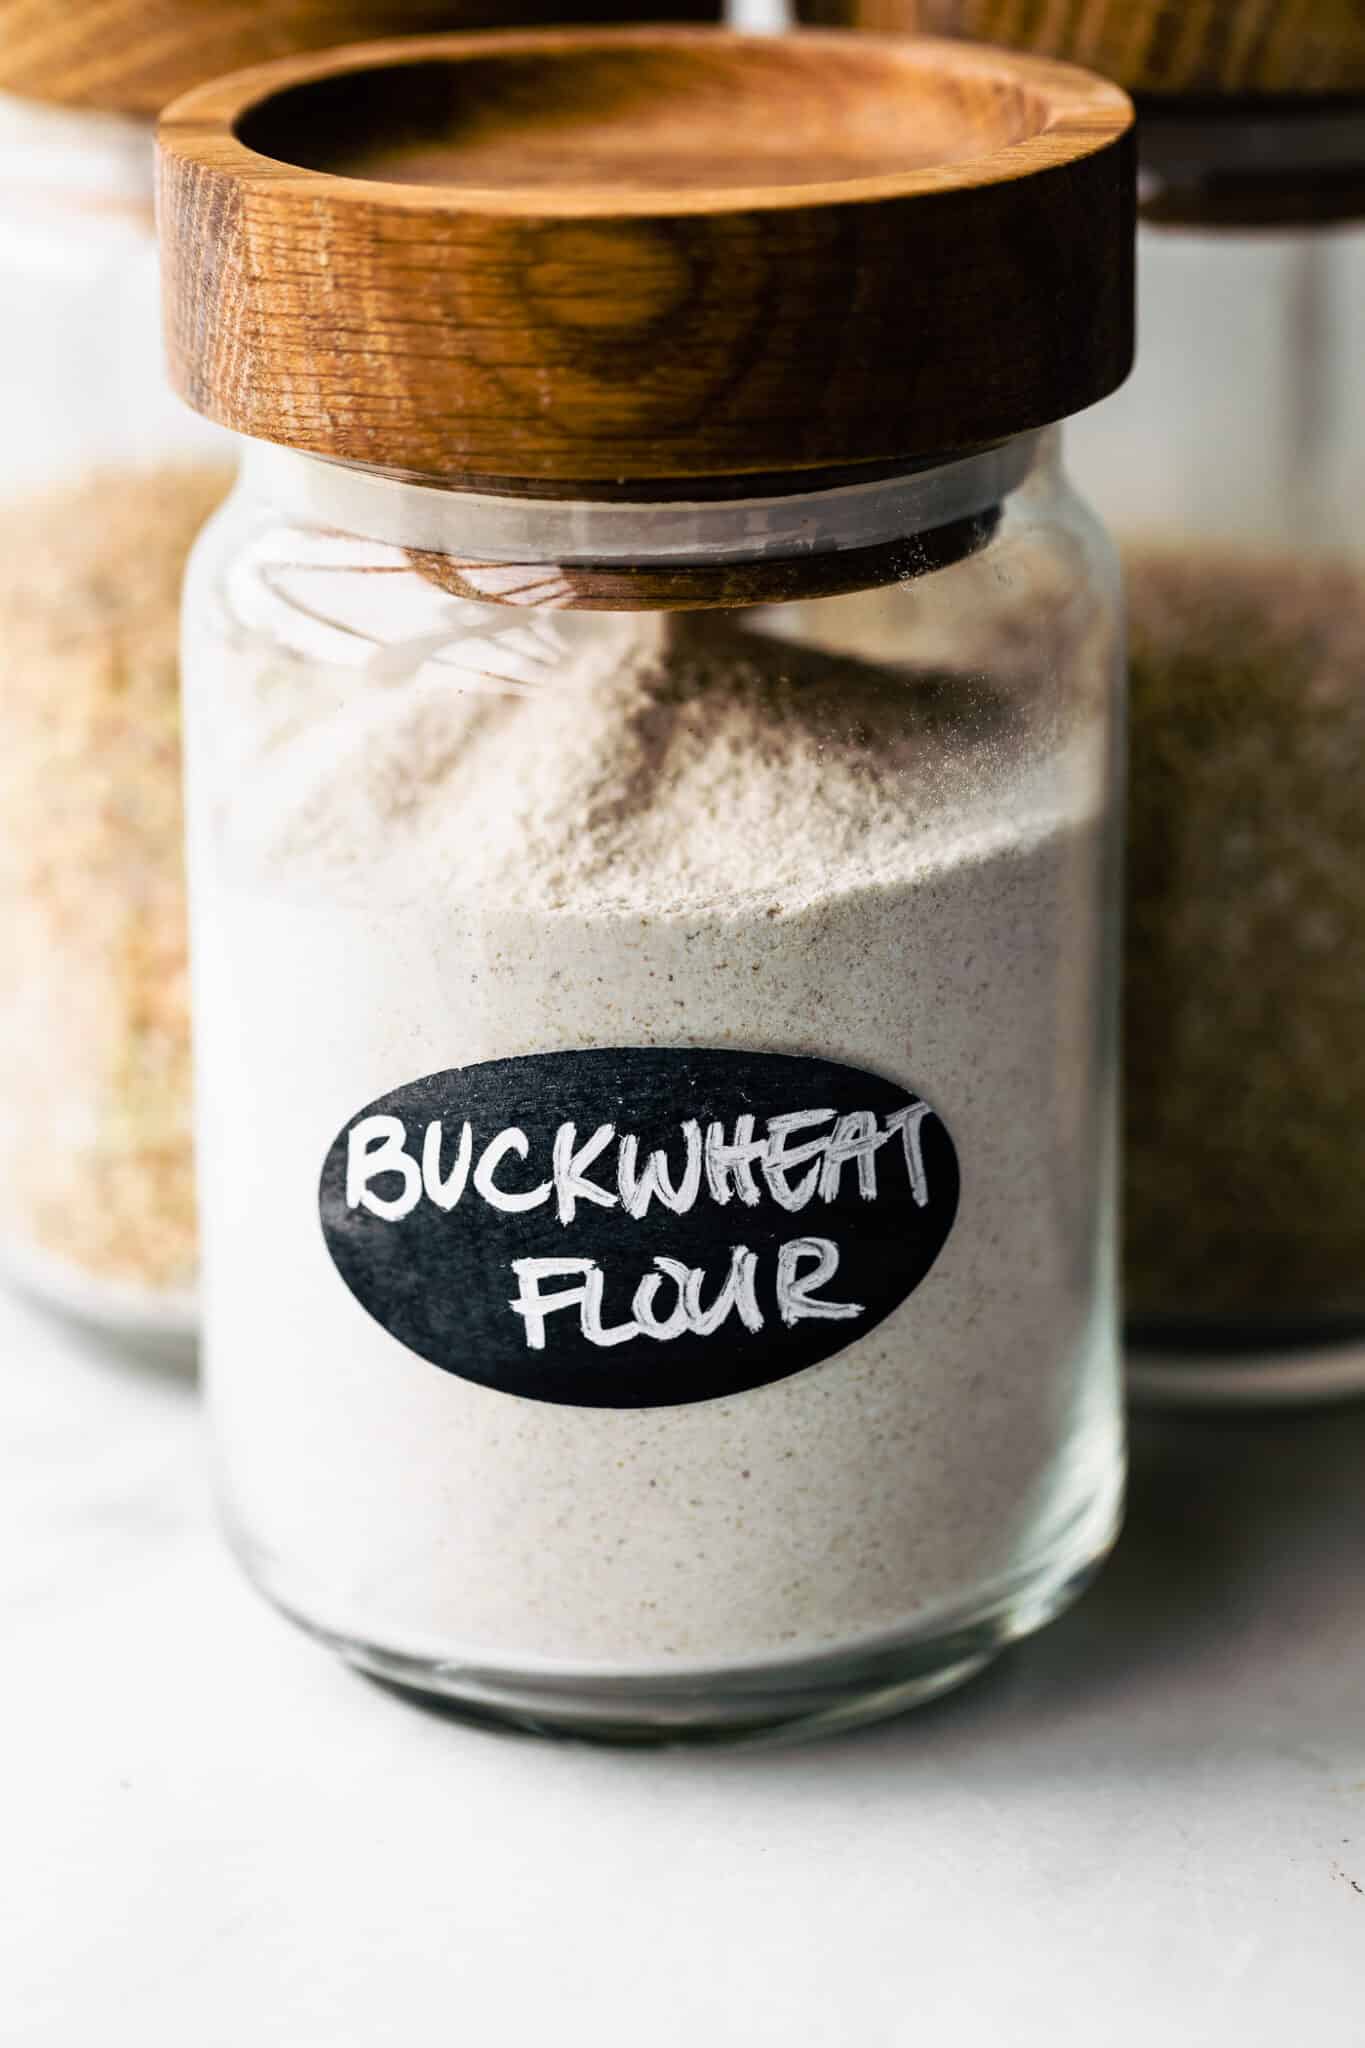 A clear glass jar of buckwheat flour with a wooden lid and black label.